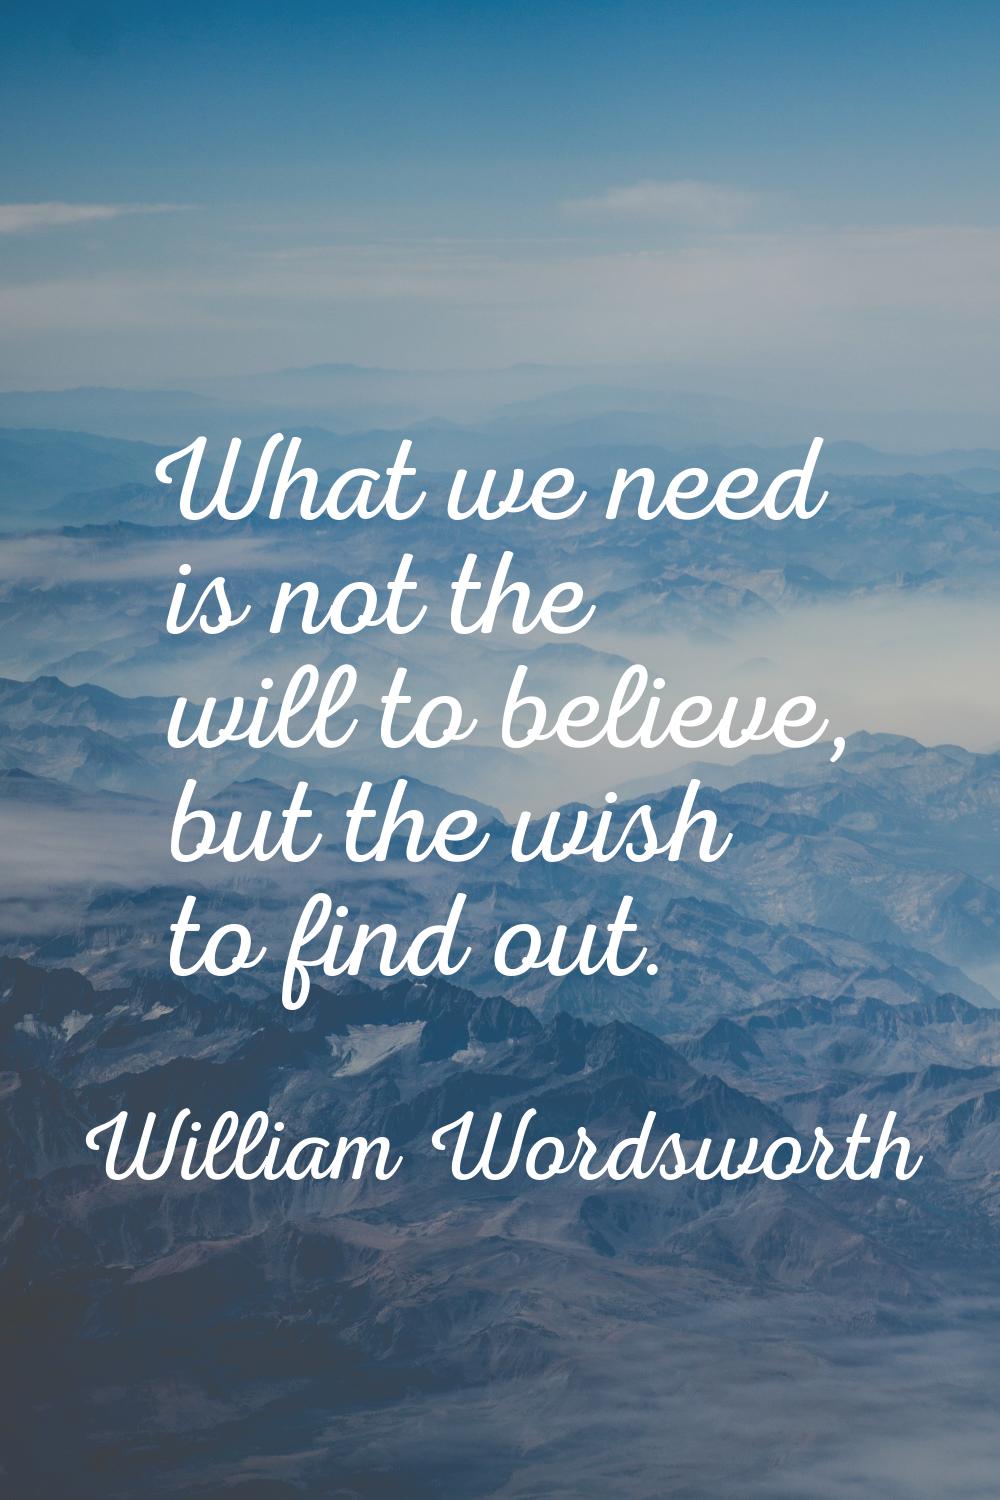 What we need is not the will to believe, but the wish to find out.